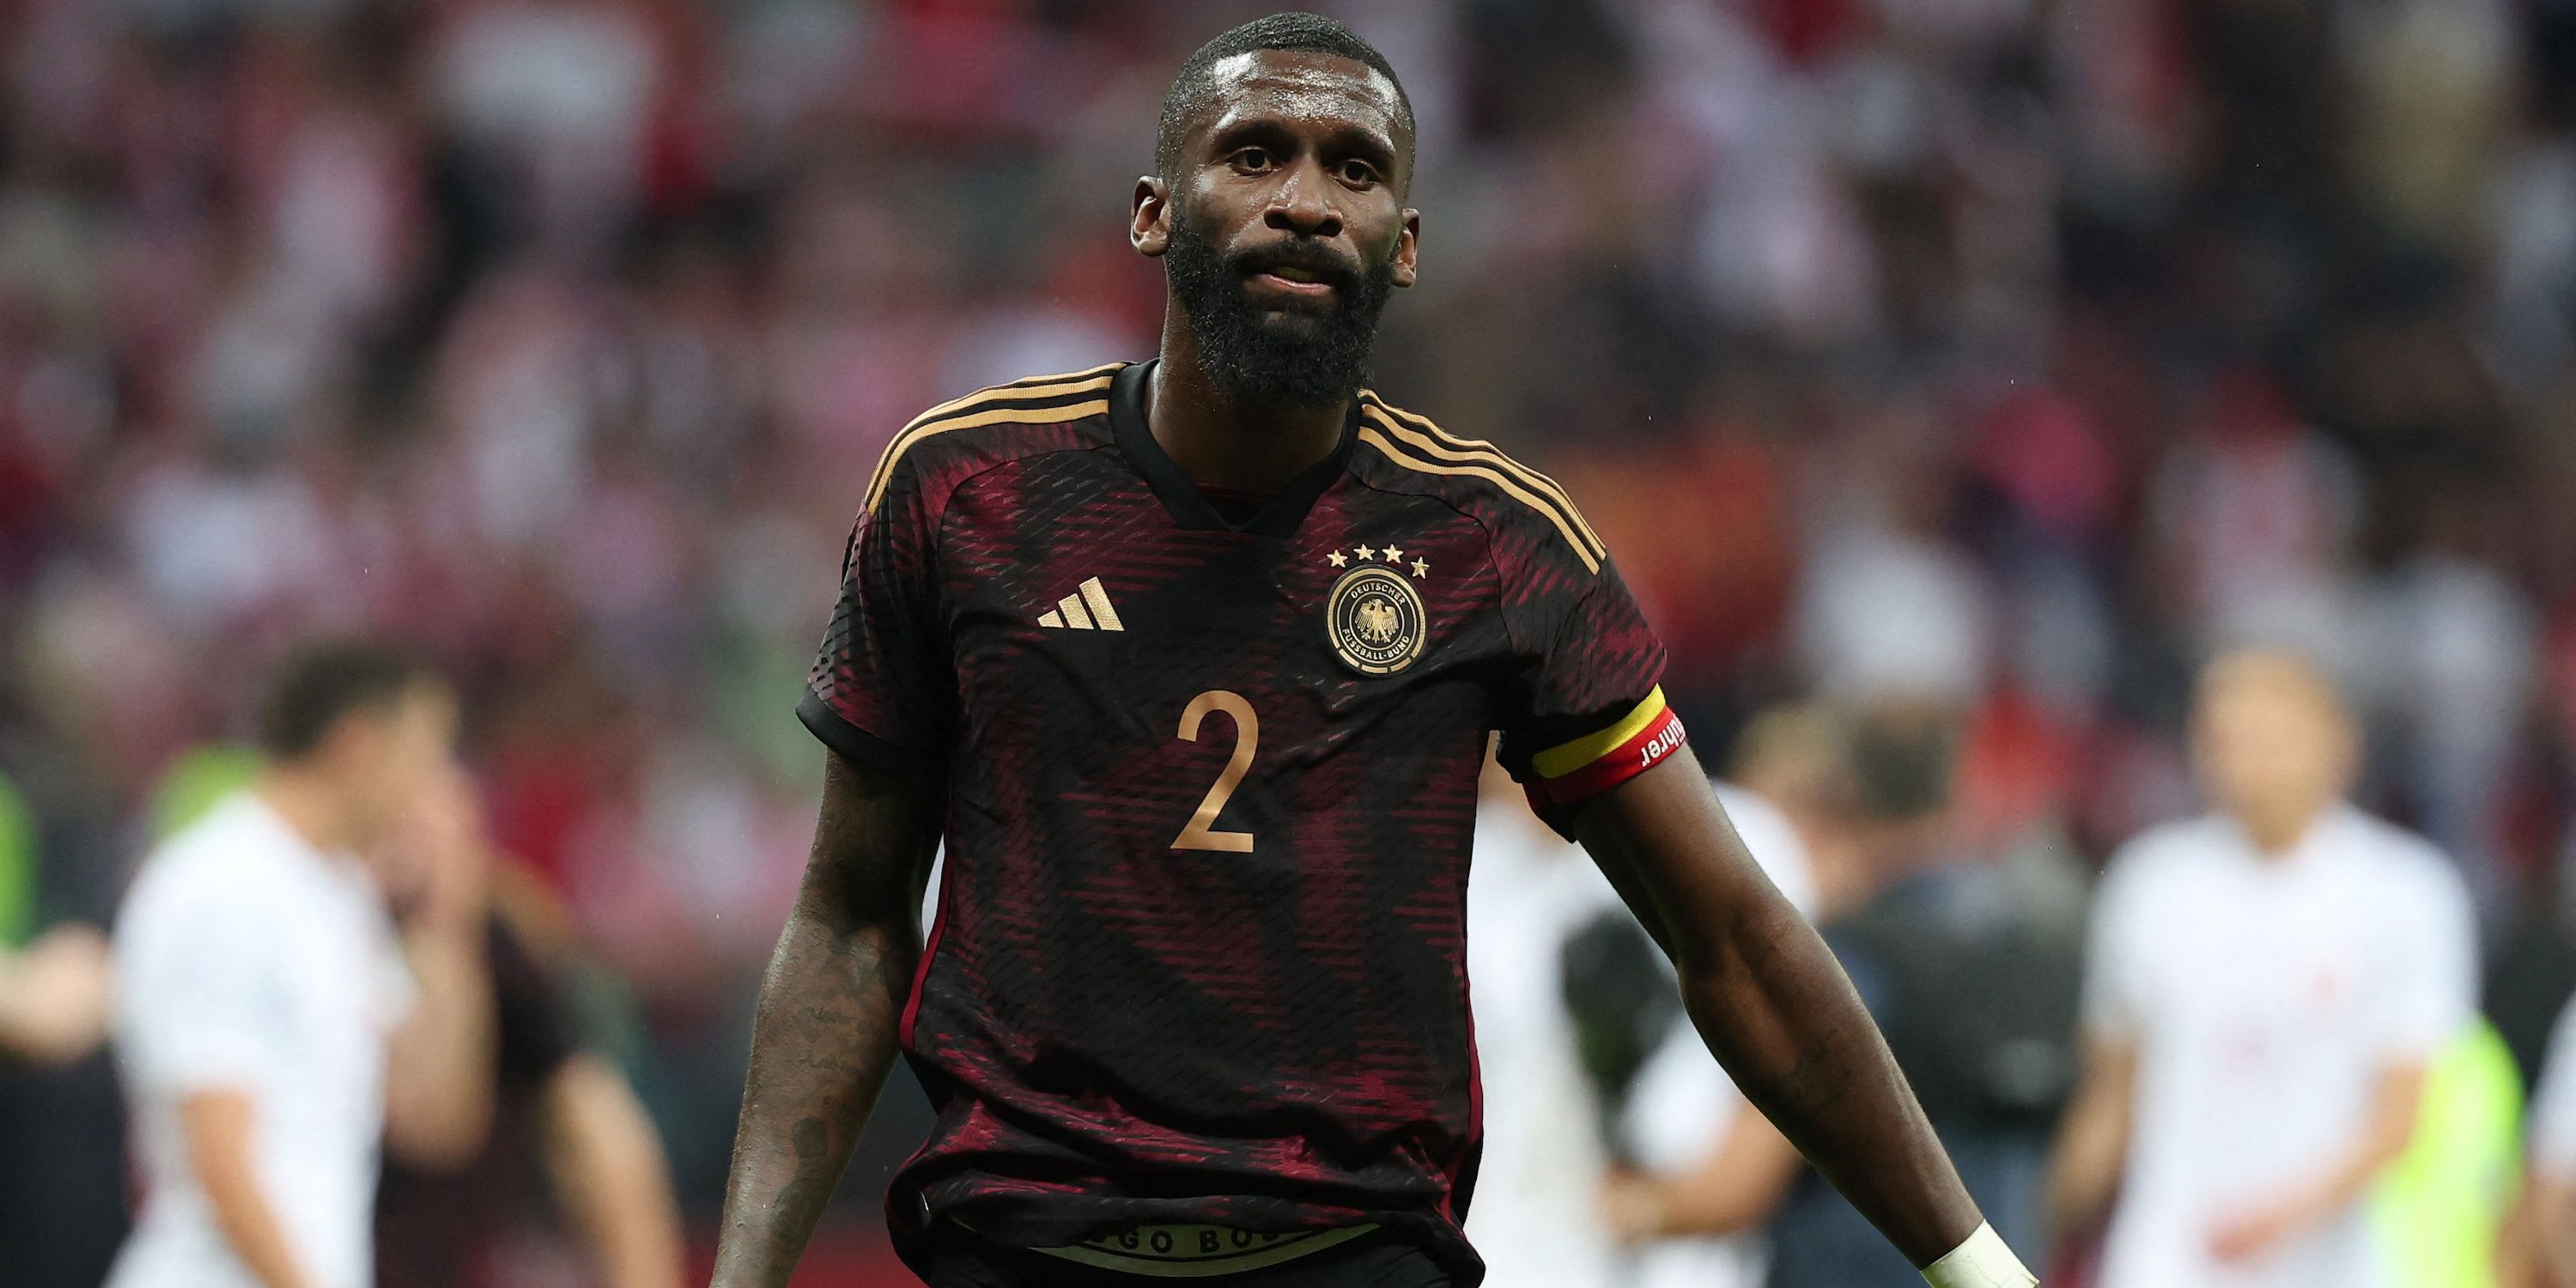  Germany's Antonio Rudiger after the match 